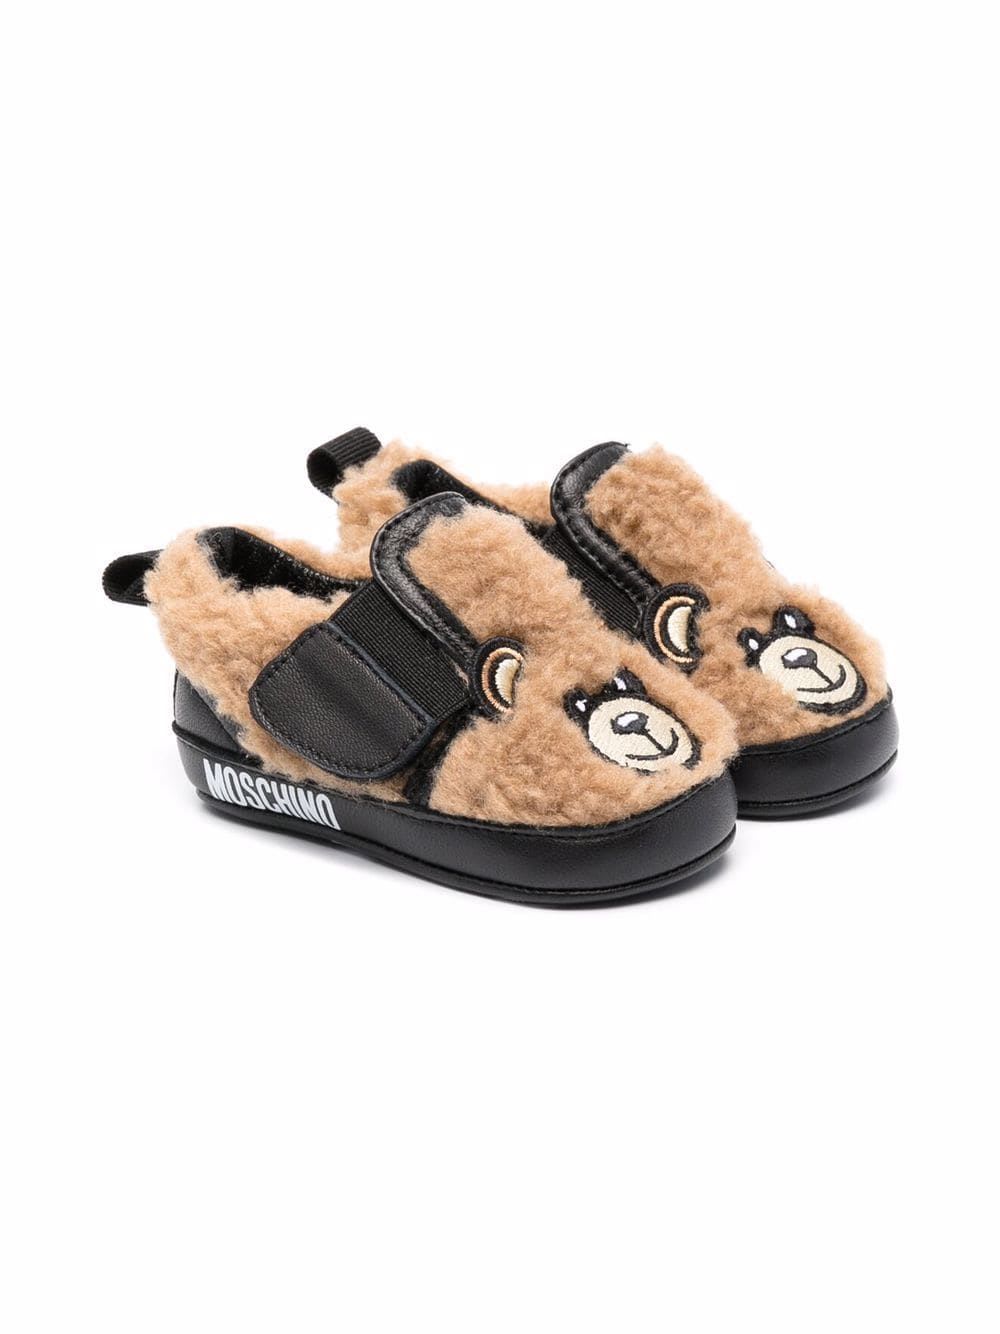 Moschino Teddy Bear First Steps Shoes